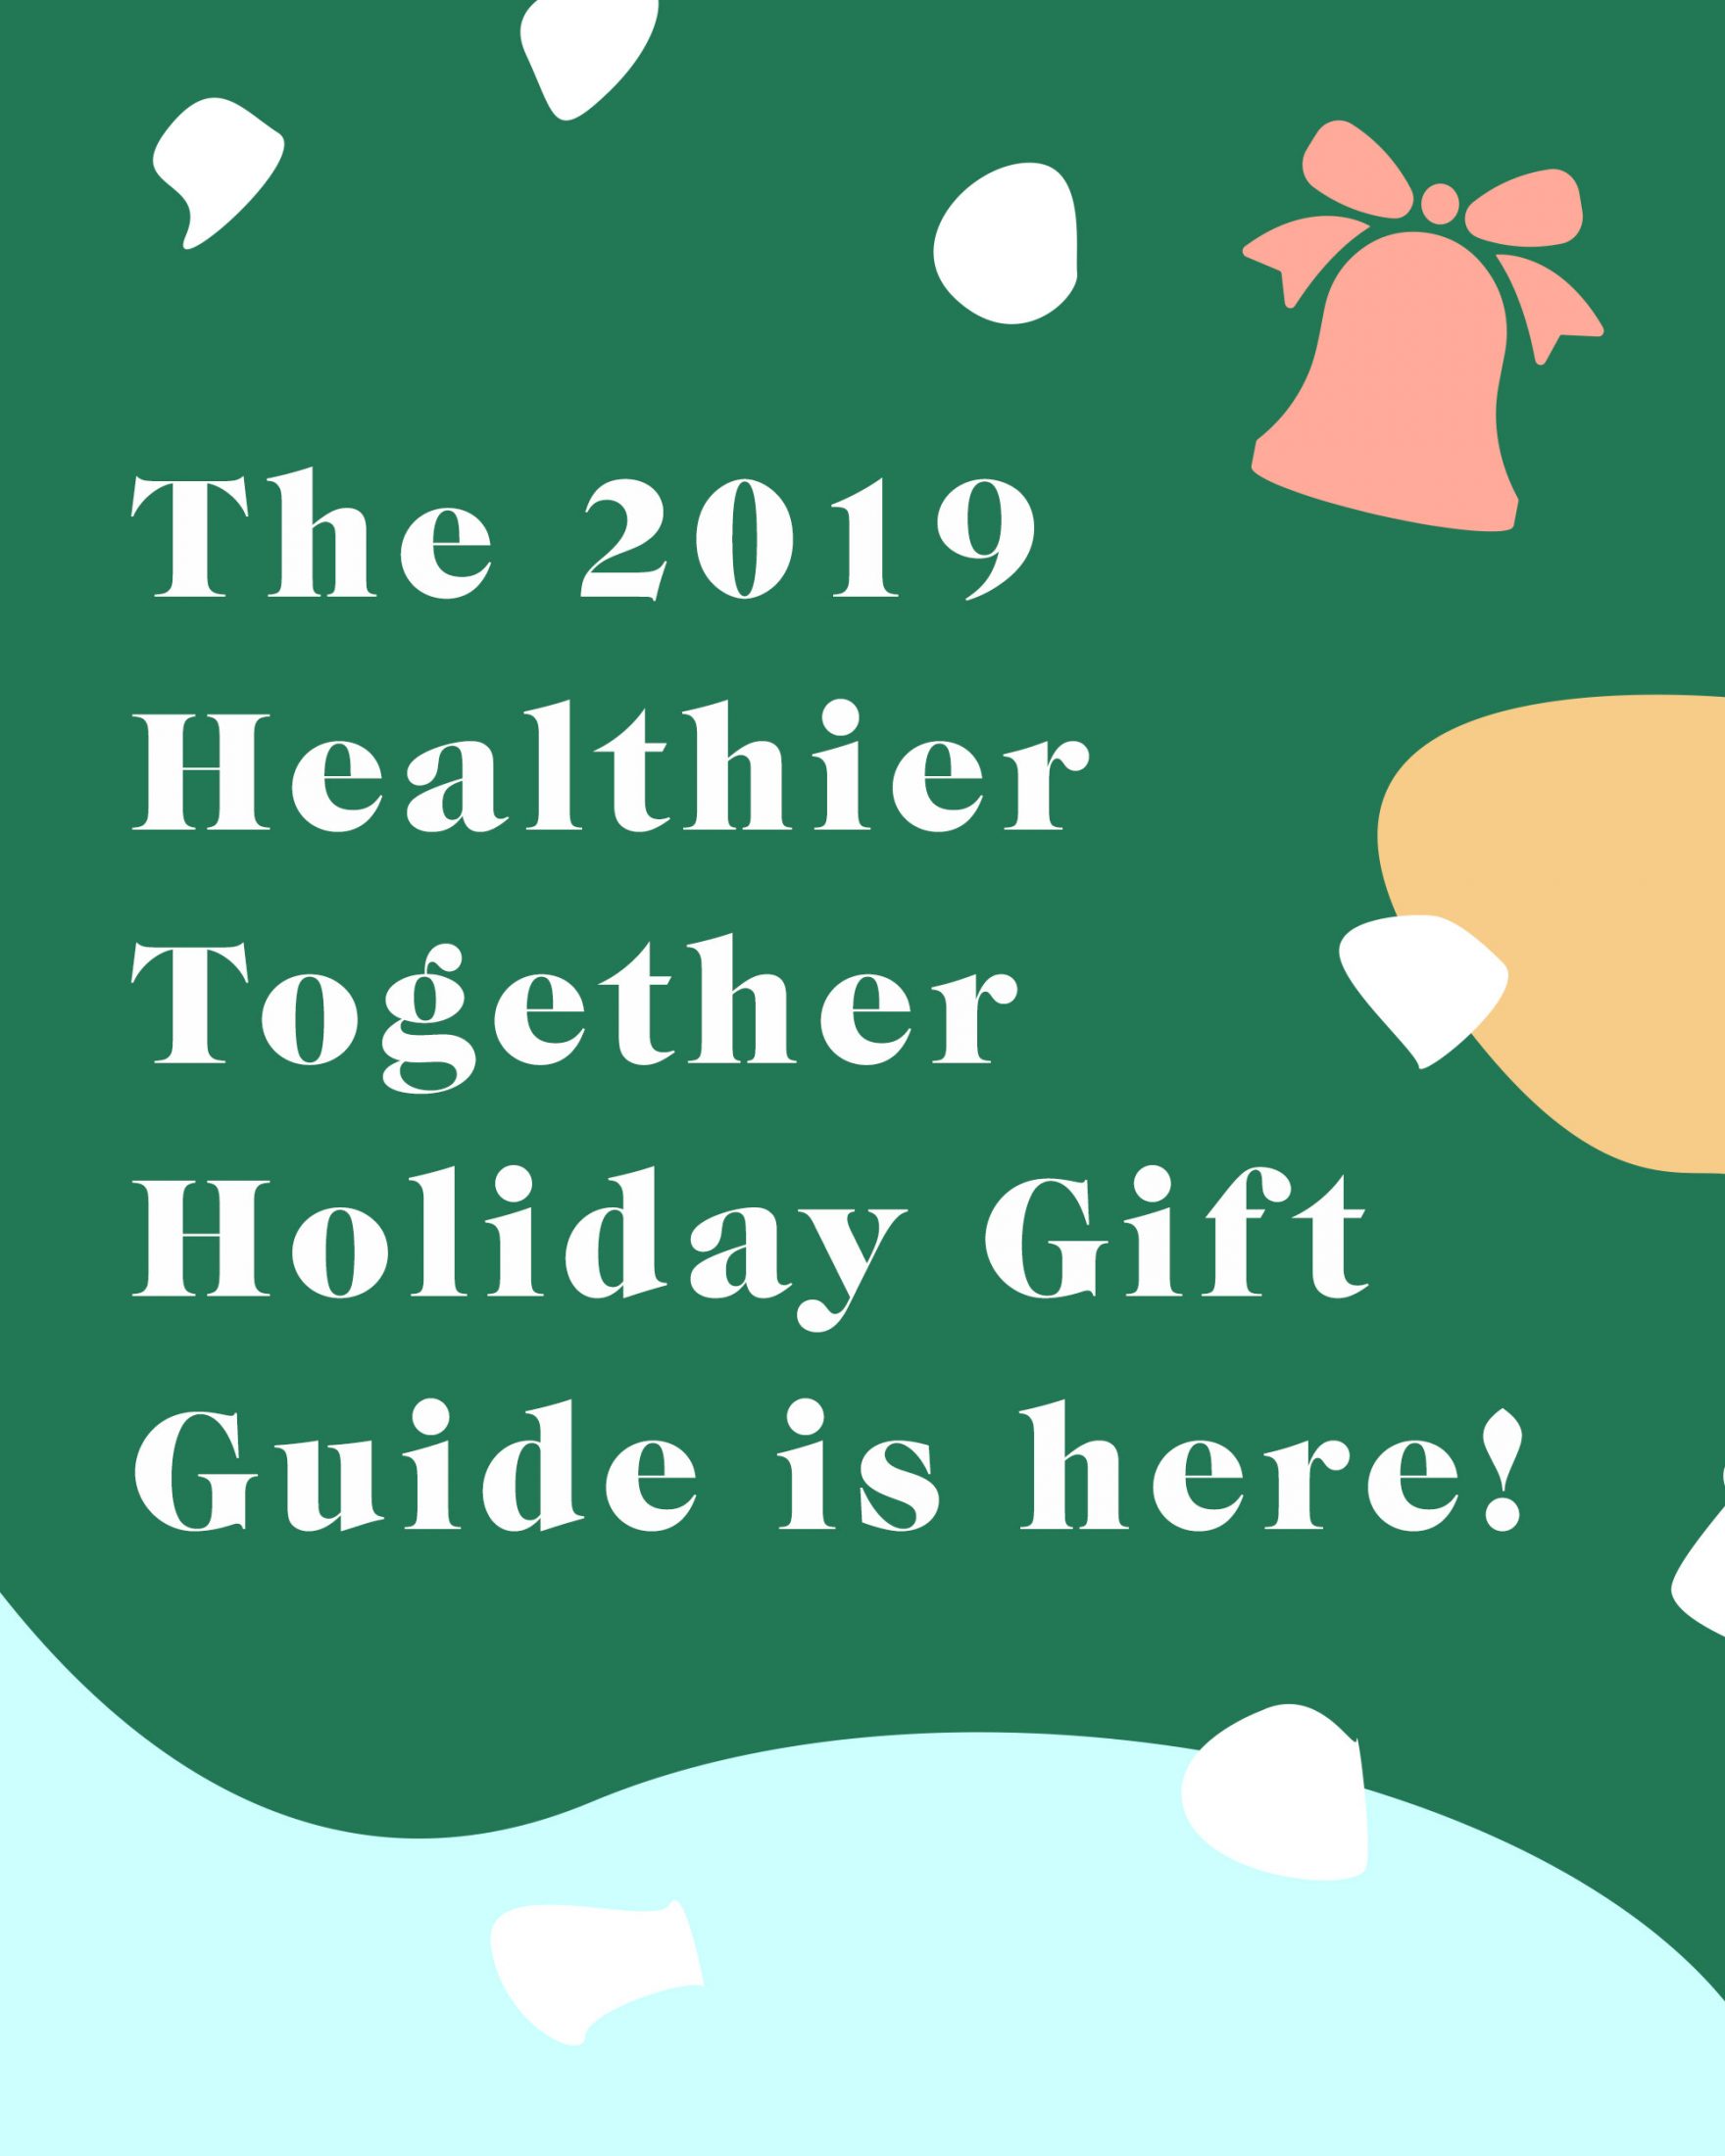 https://www.lizmoody.com/wp-content/uploads/2019/11/gift-guide-scaled.jpg